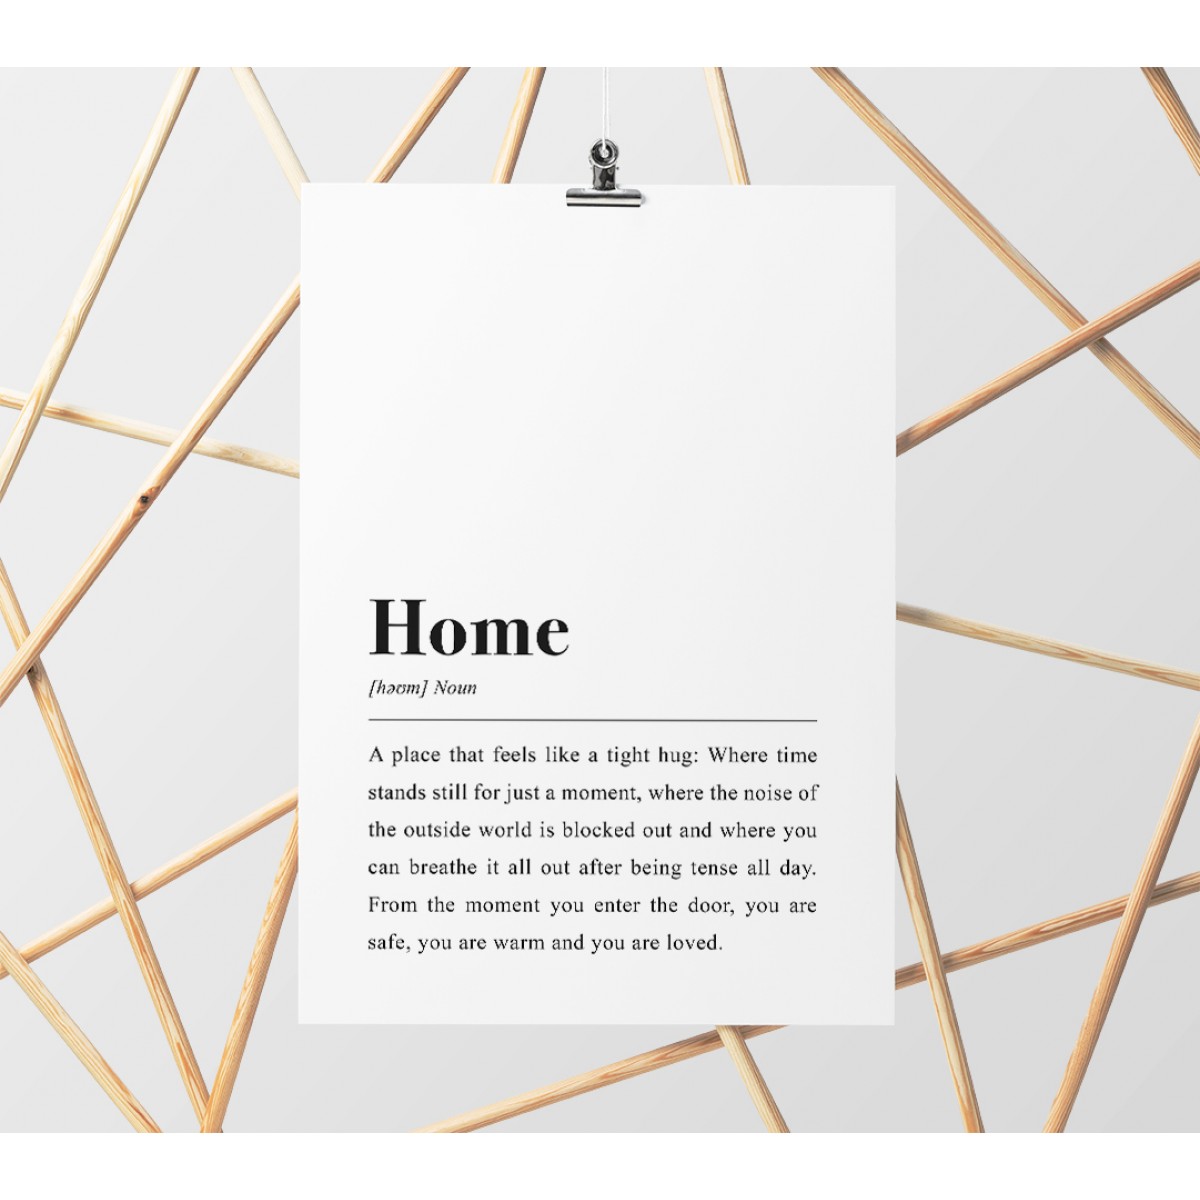 Home Poster DIN A4: Home Definition